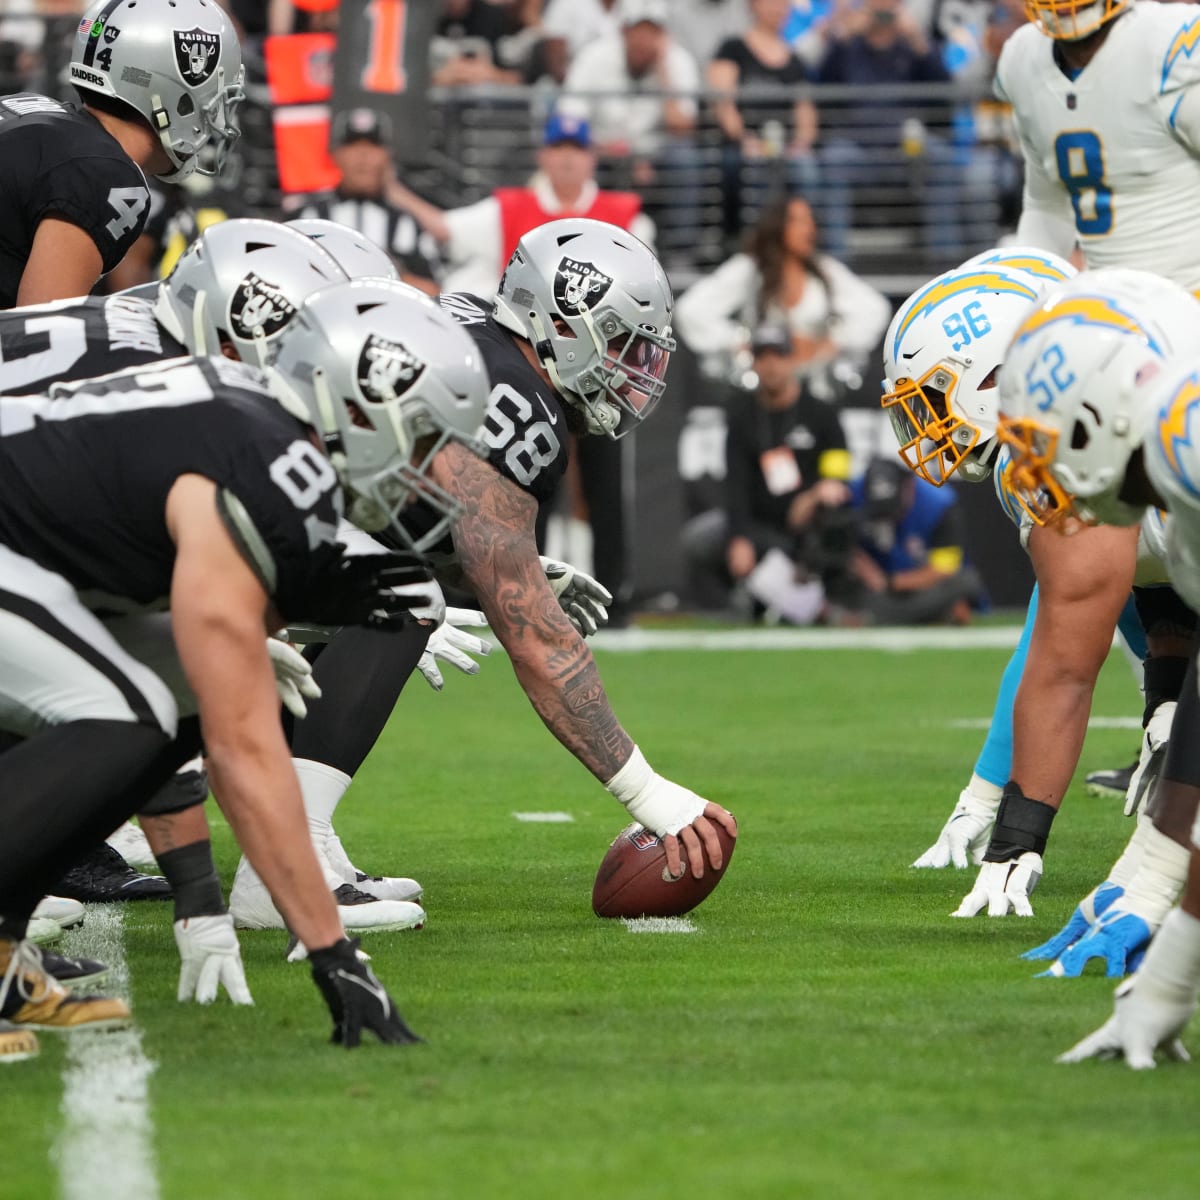 raiders vs chargers game 2021